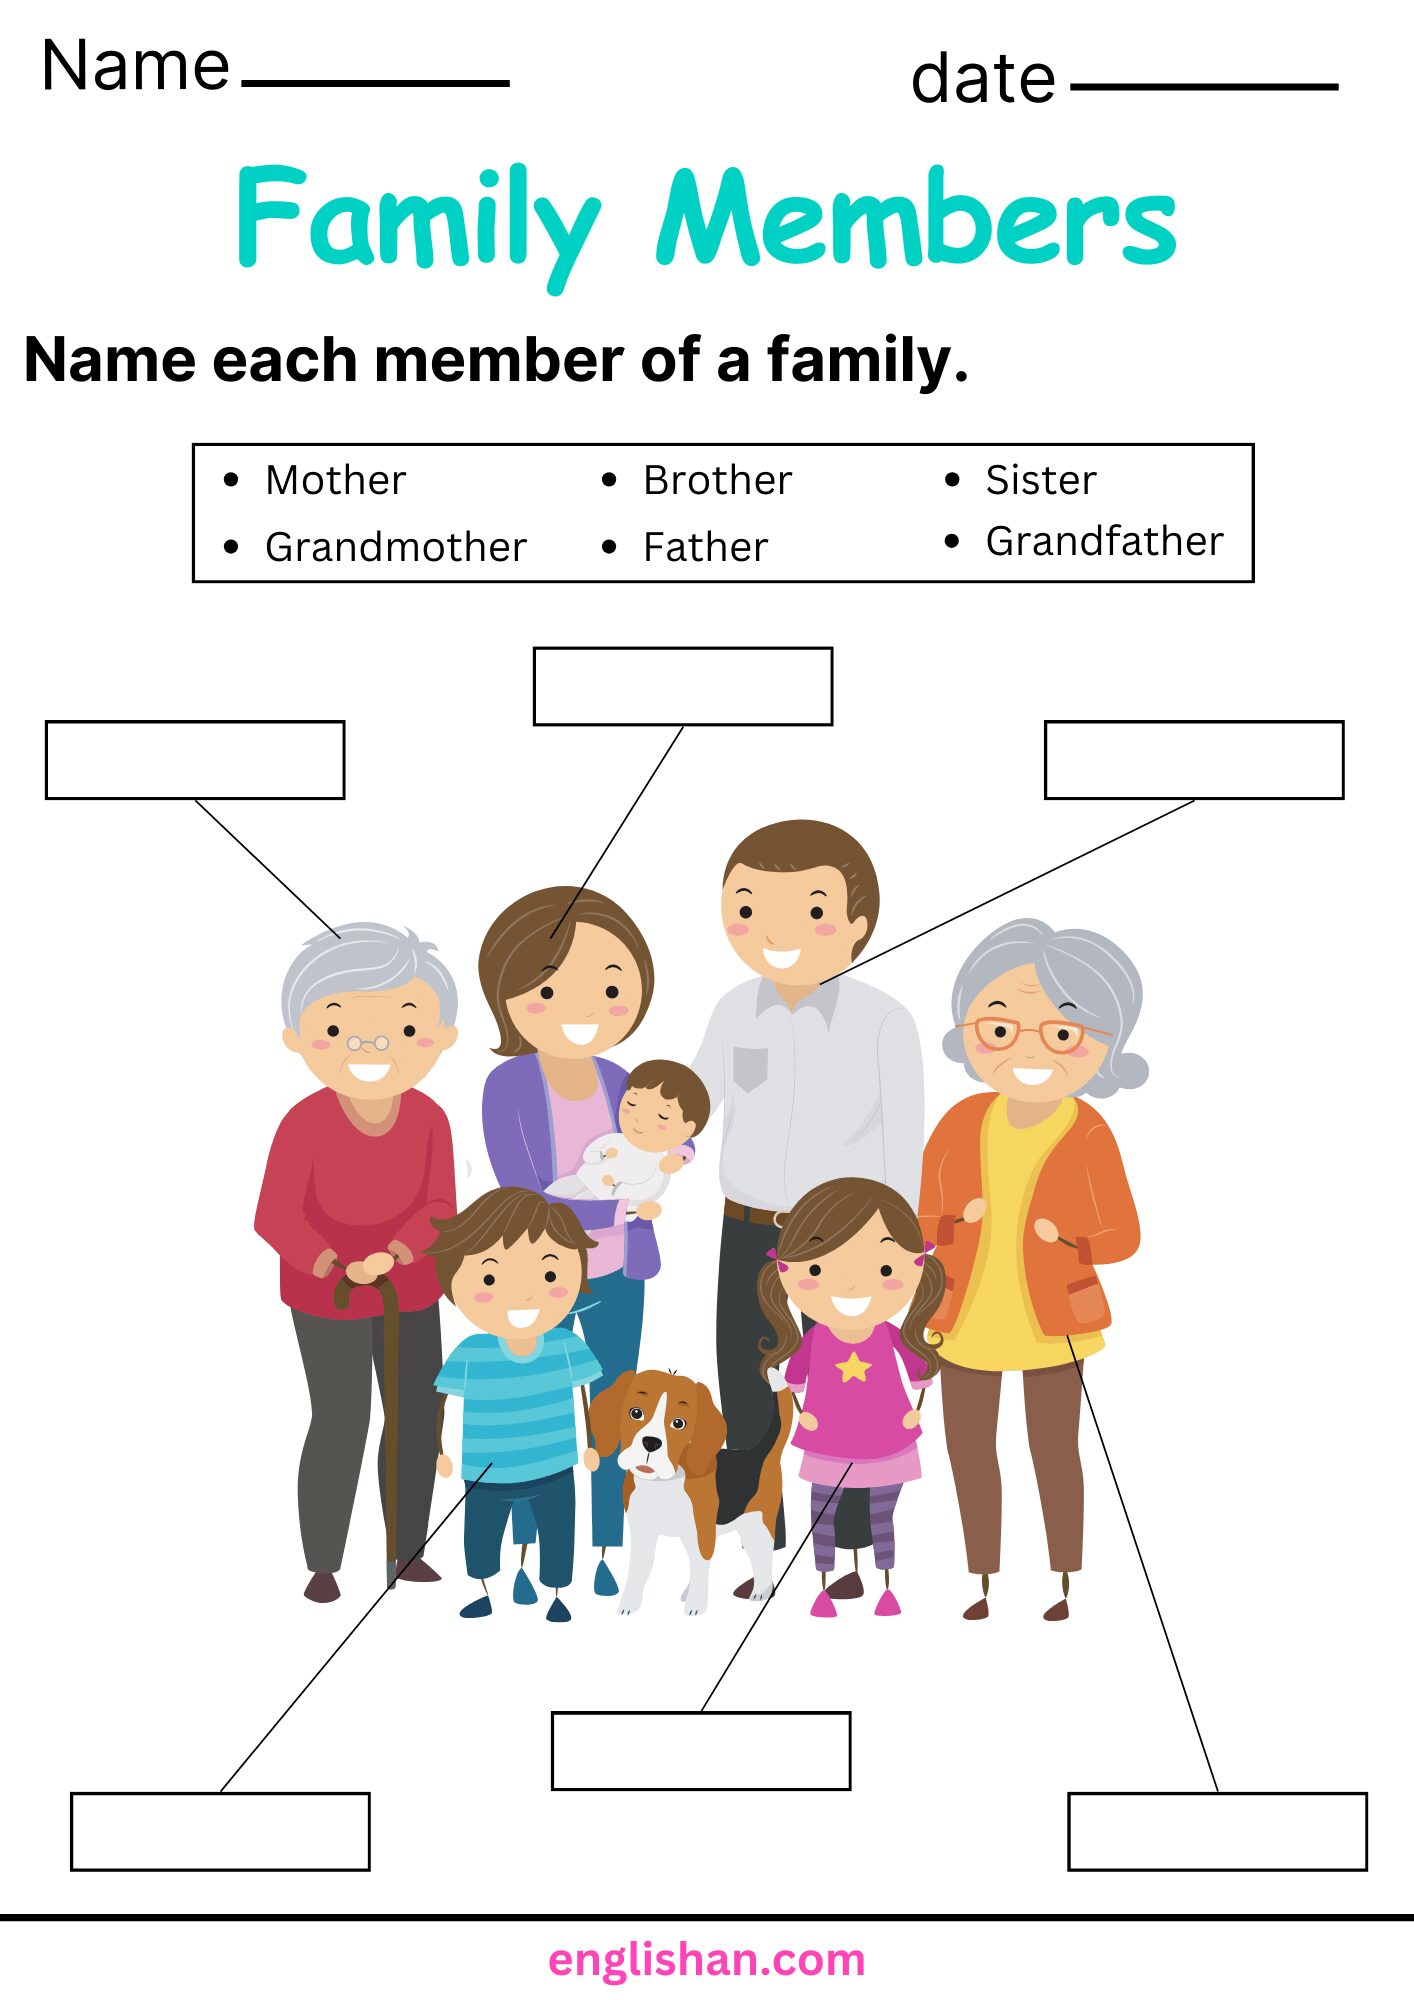 Family Members Worksheets and Exercises. My Family Worksheet. Members of Family Worksheet. Write Name of Each Family Members